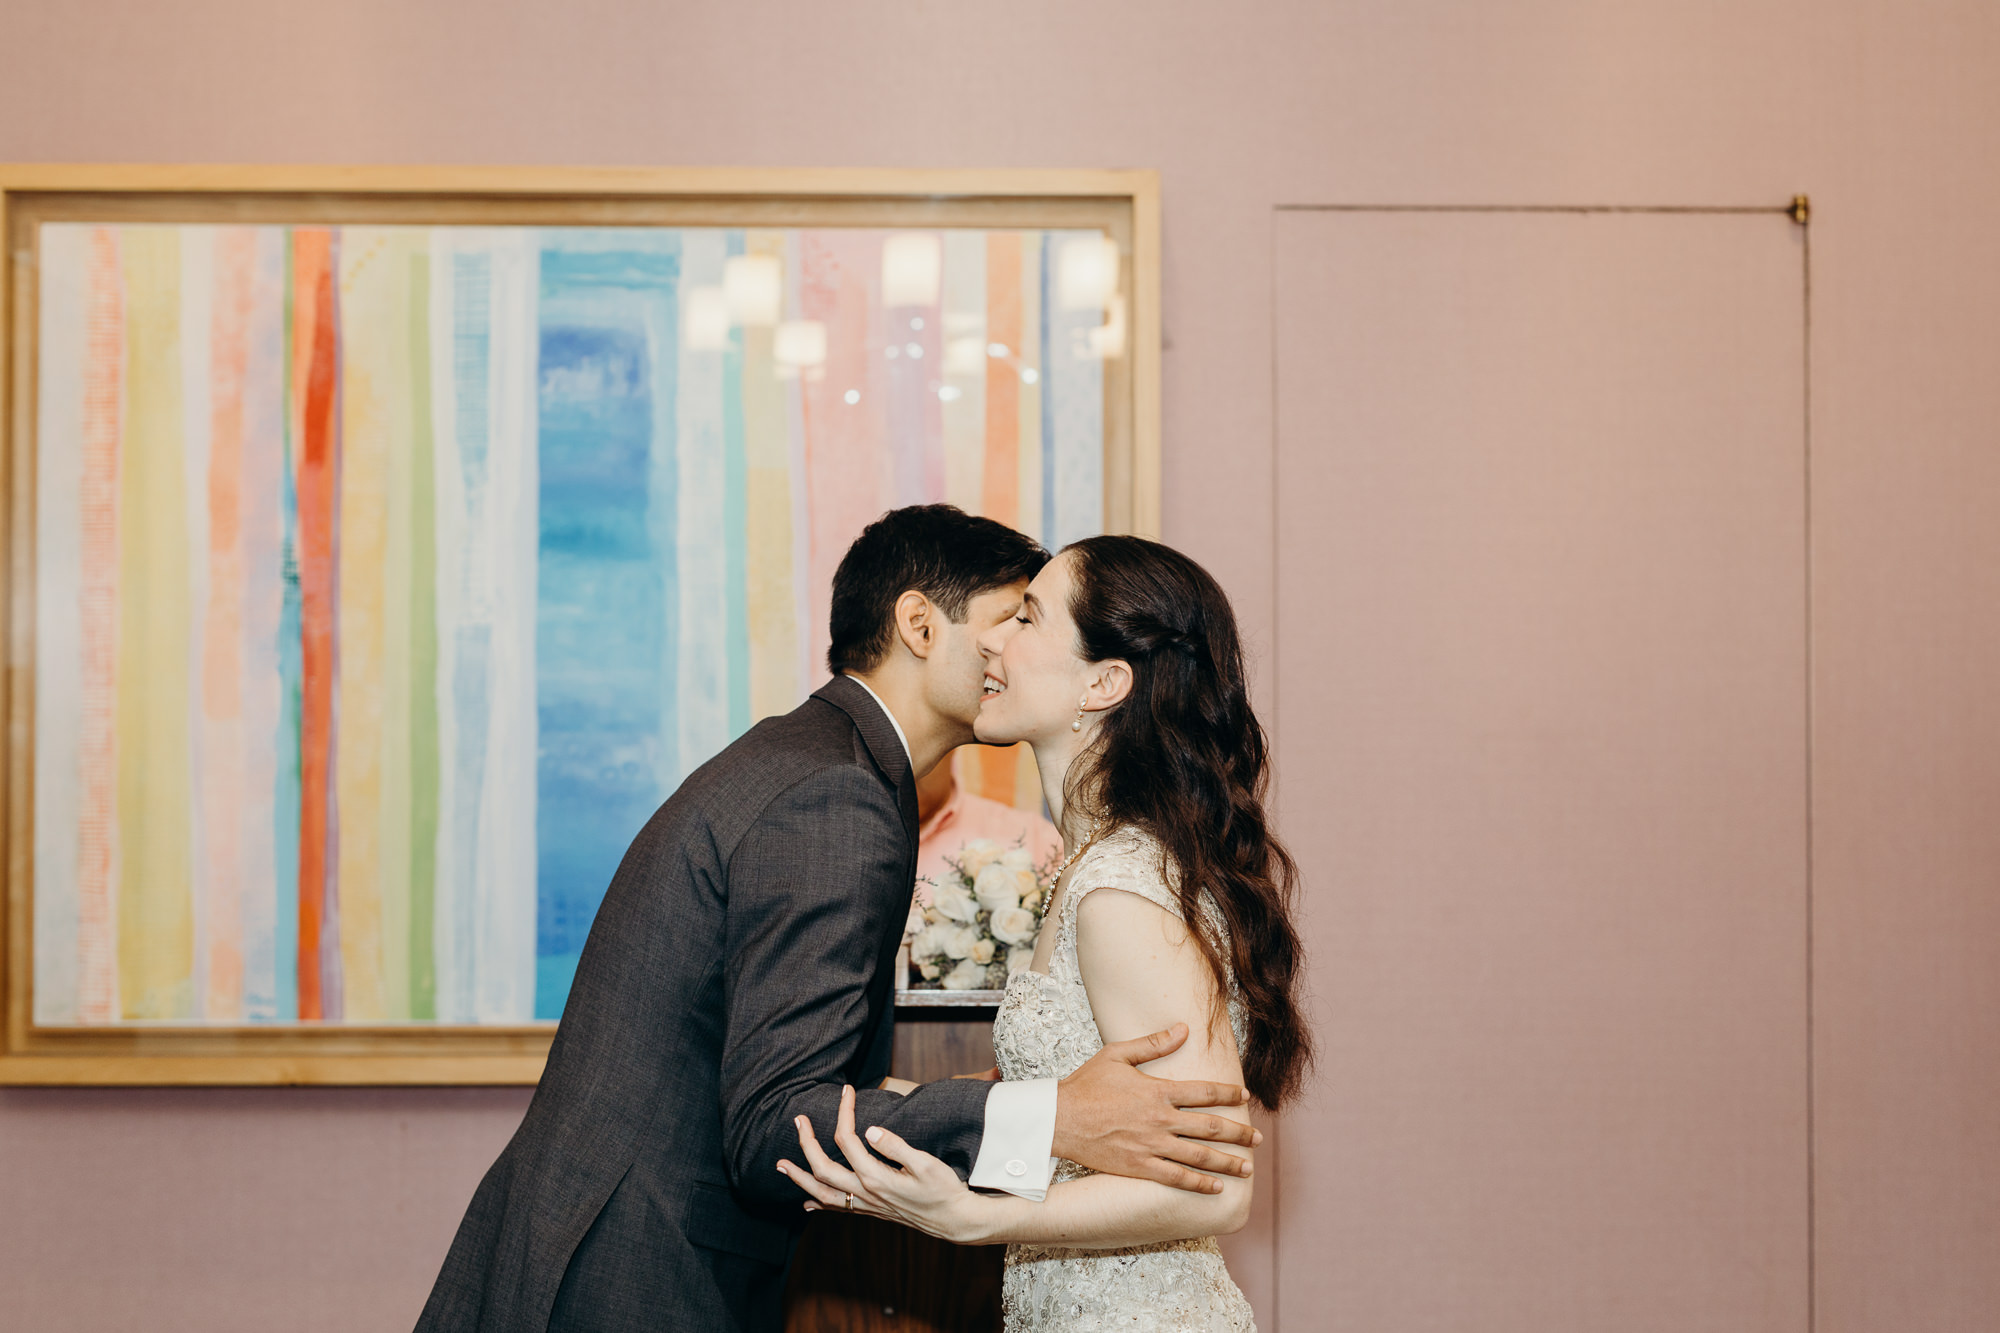 bride and groom kiss during their wedding ceremony at city hall in new york city, ny